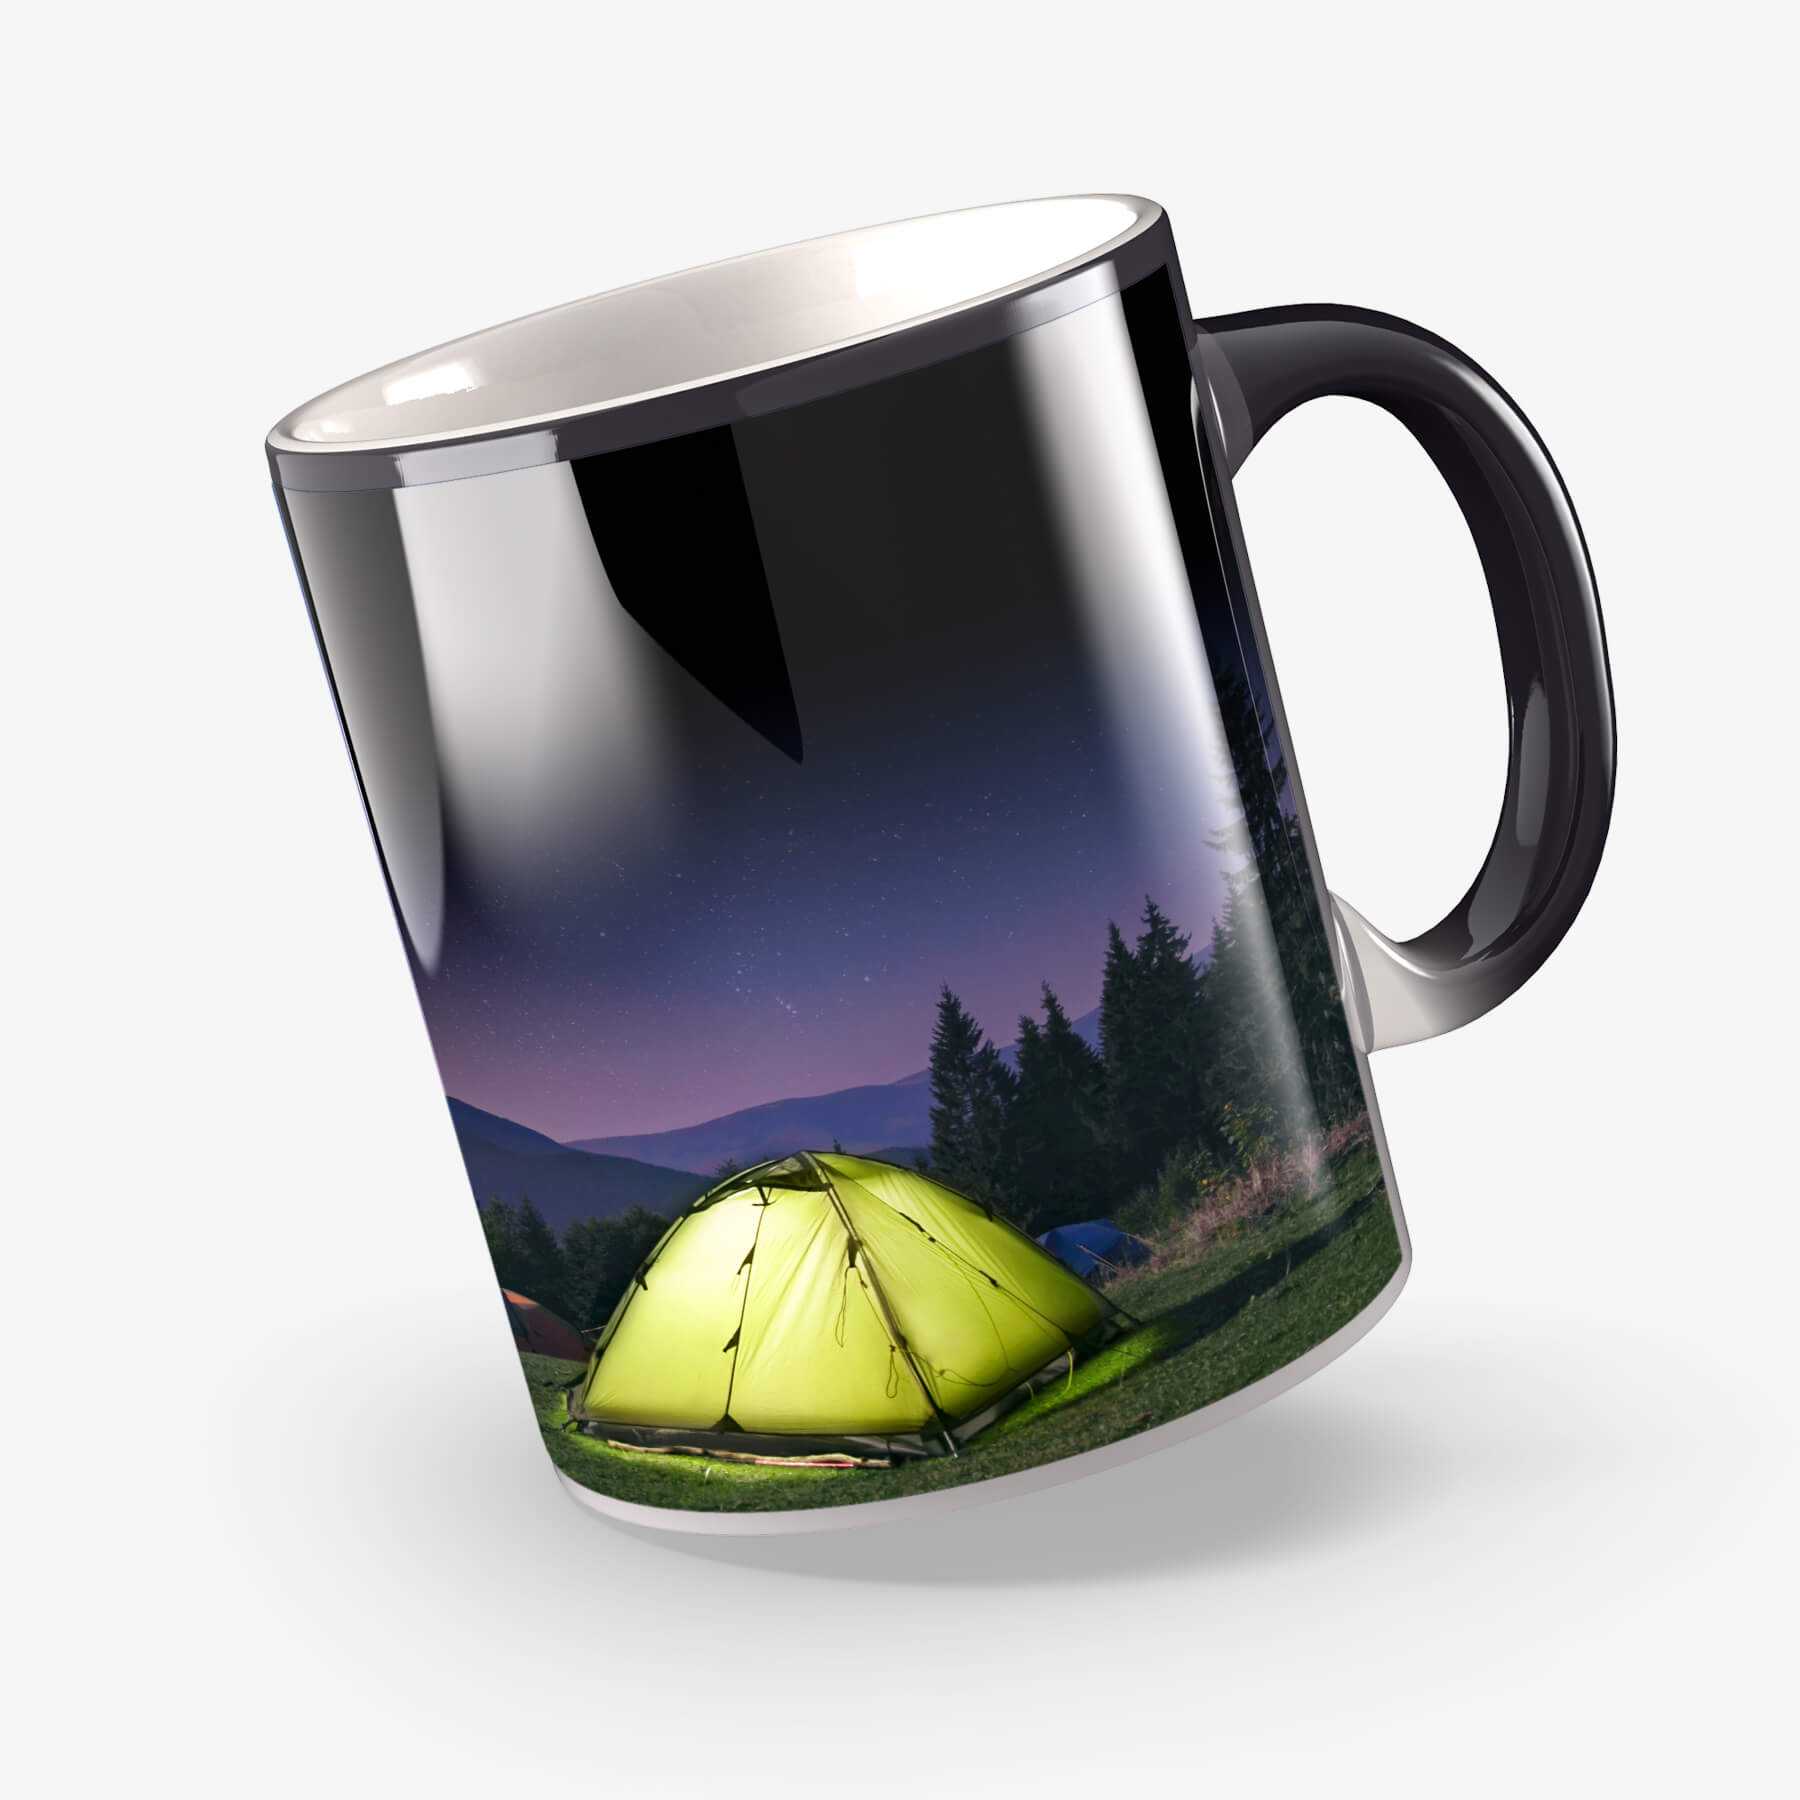 https://www.ifolor.fi/content/dam/ifolor/product-pages-content/detail/photo-gifts/MagicMug_Category_detail.jpg.transform/q60/image.jpg?MagicMug_Category_detail.jpg